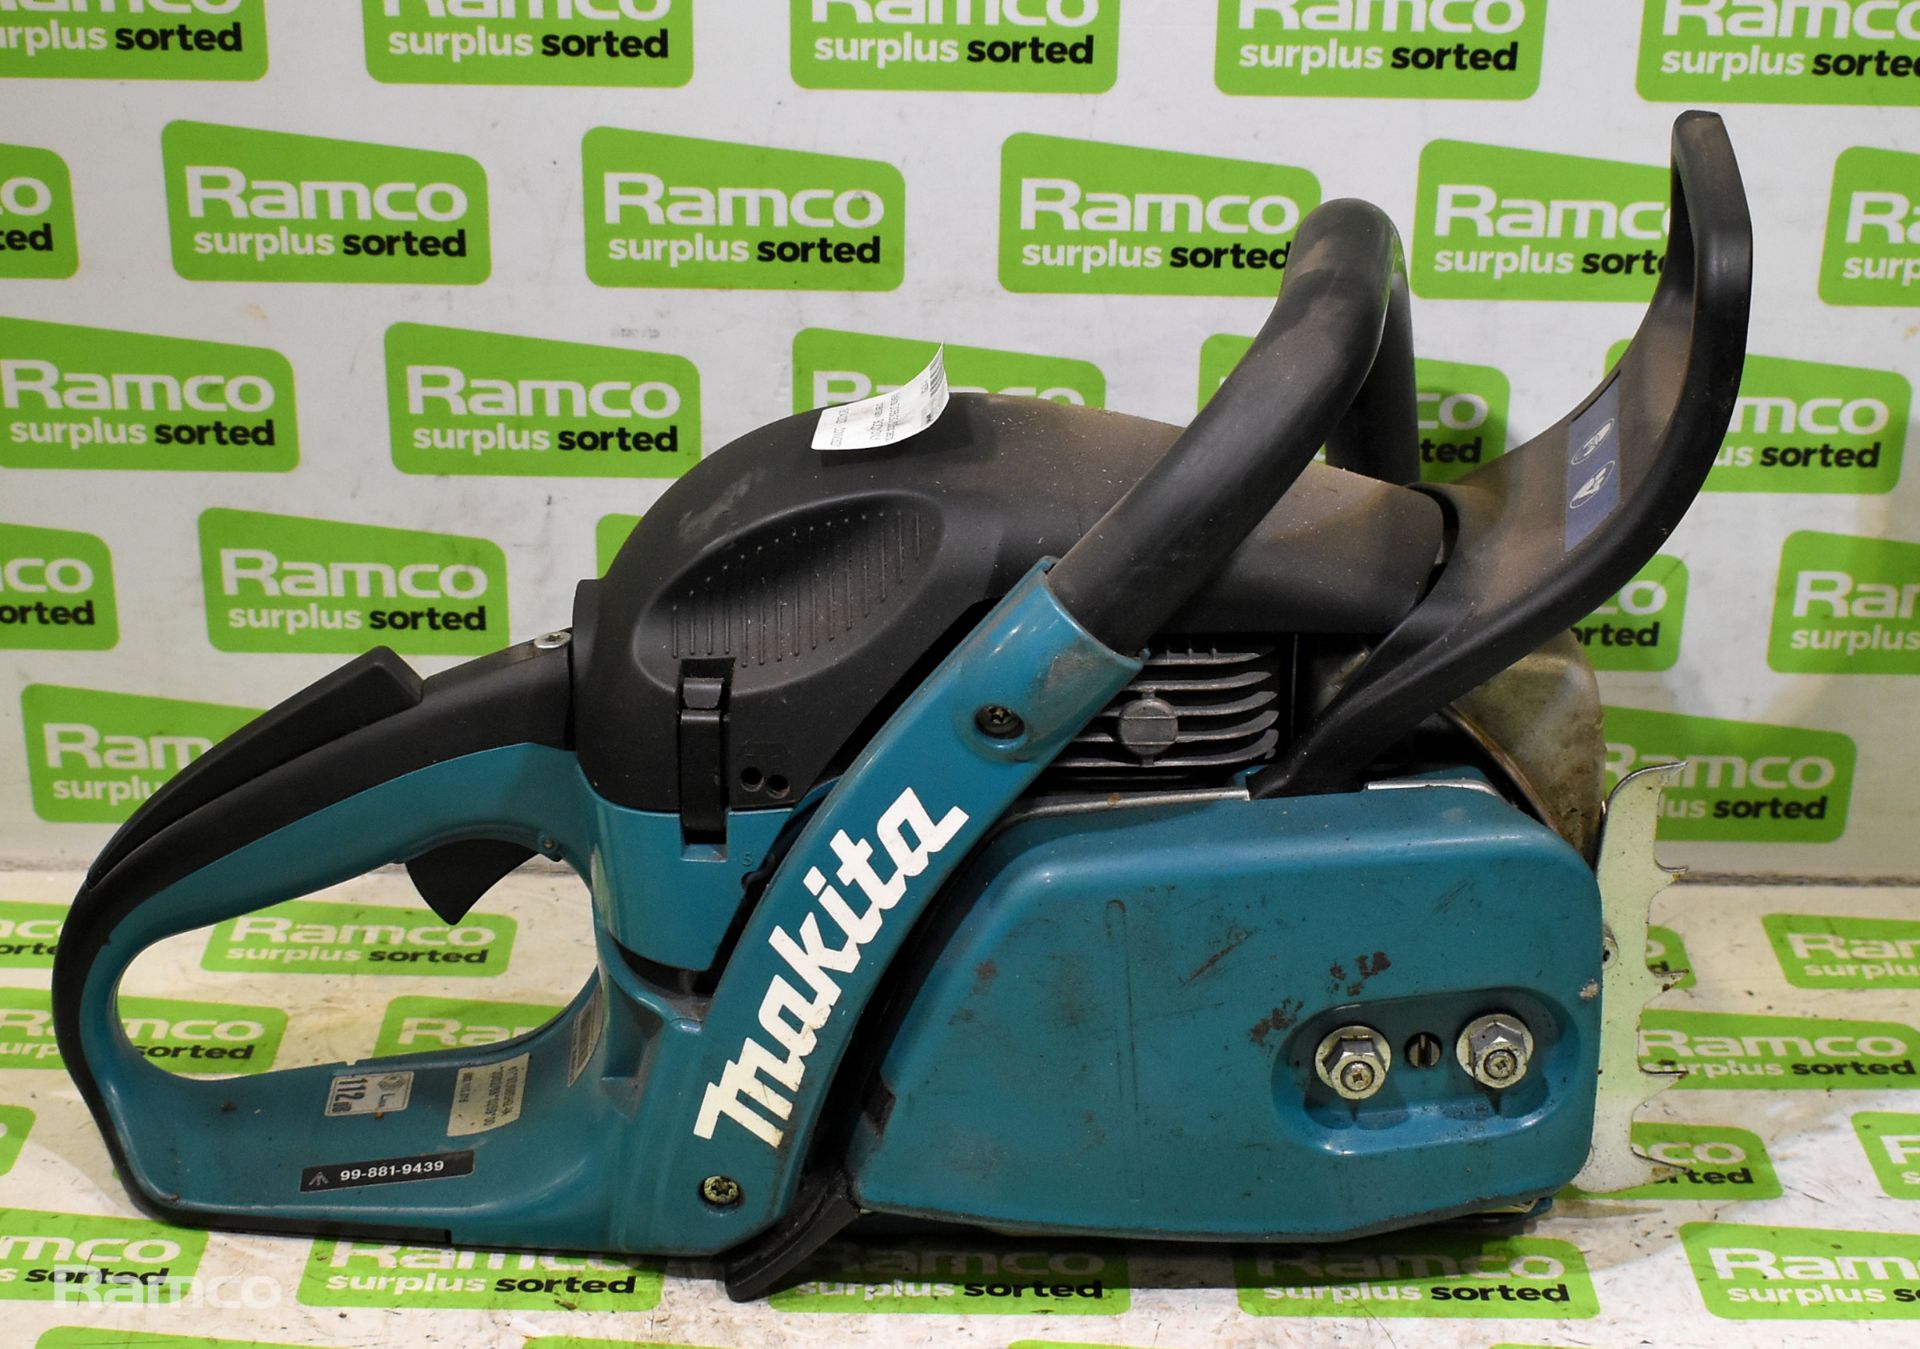 6x Makita DCS5030 50cc petrol chainsaw - BODIES ONLY - AS SPARES & REPAIRS - Image 24 of 33